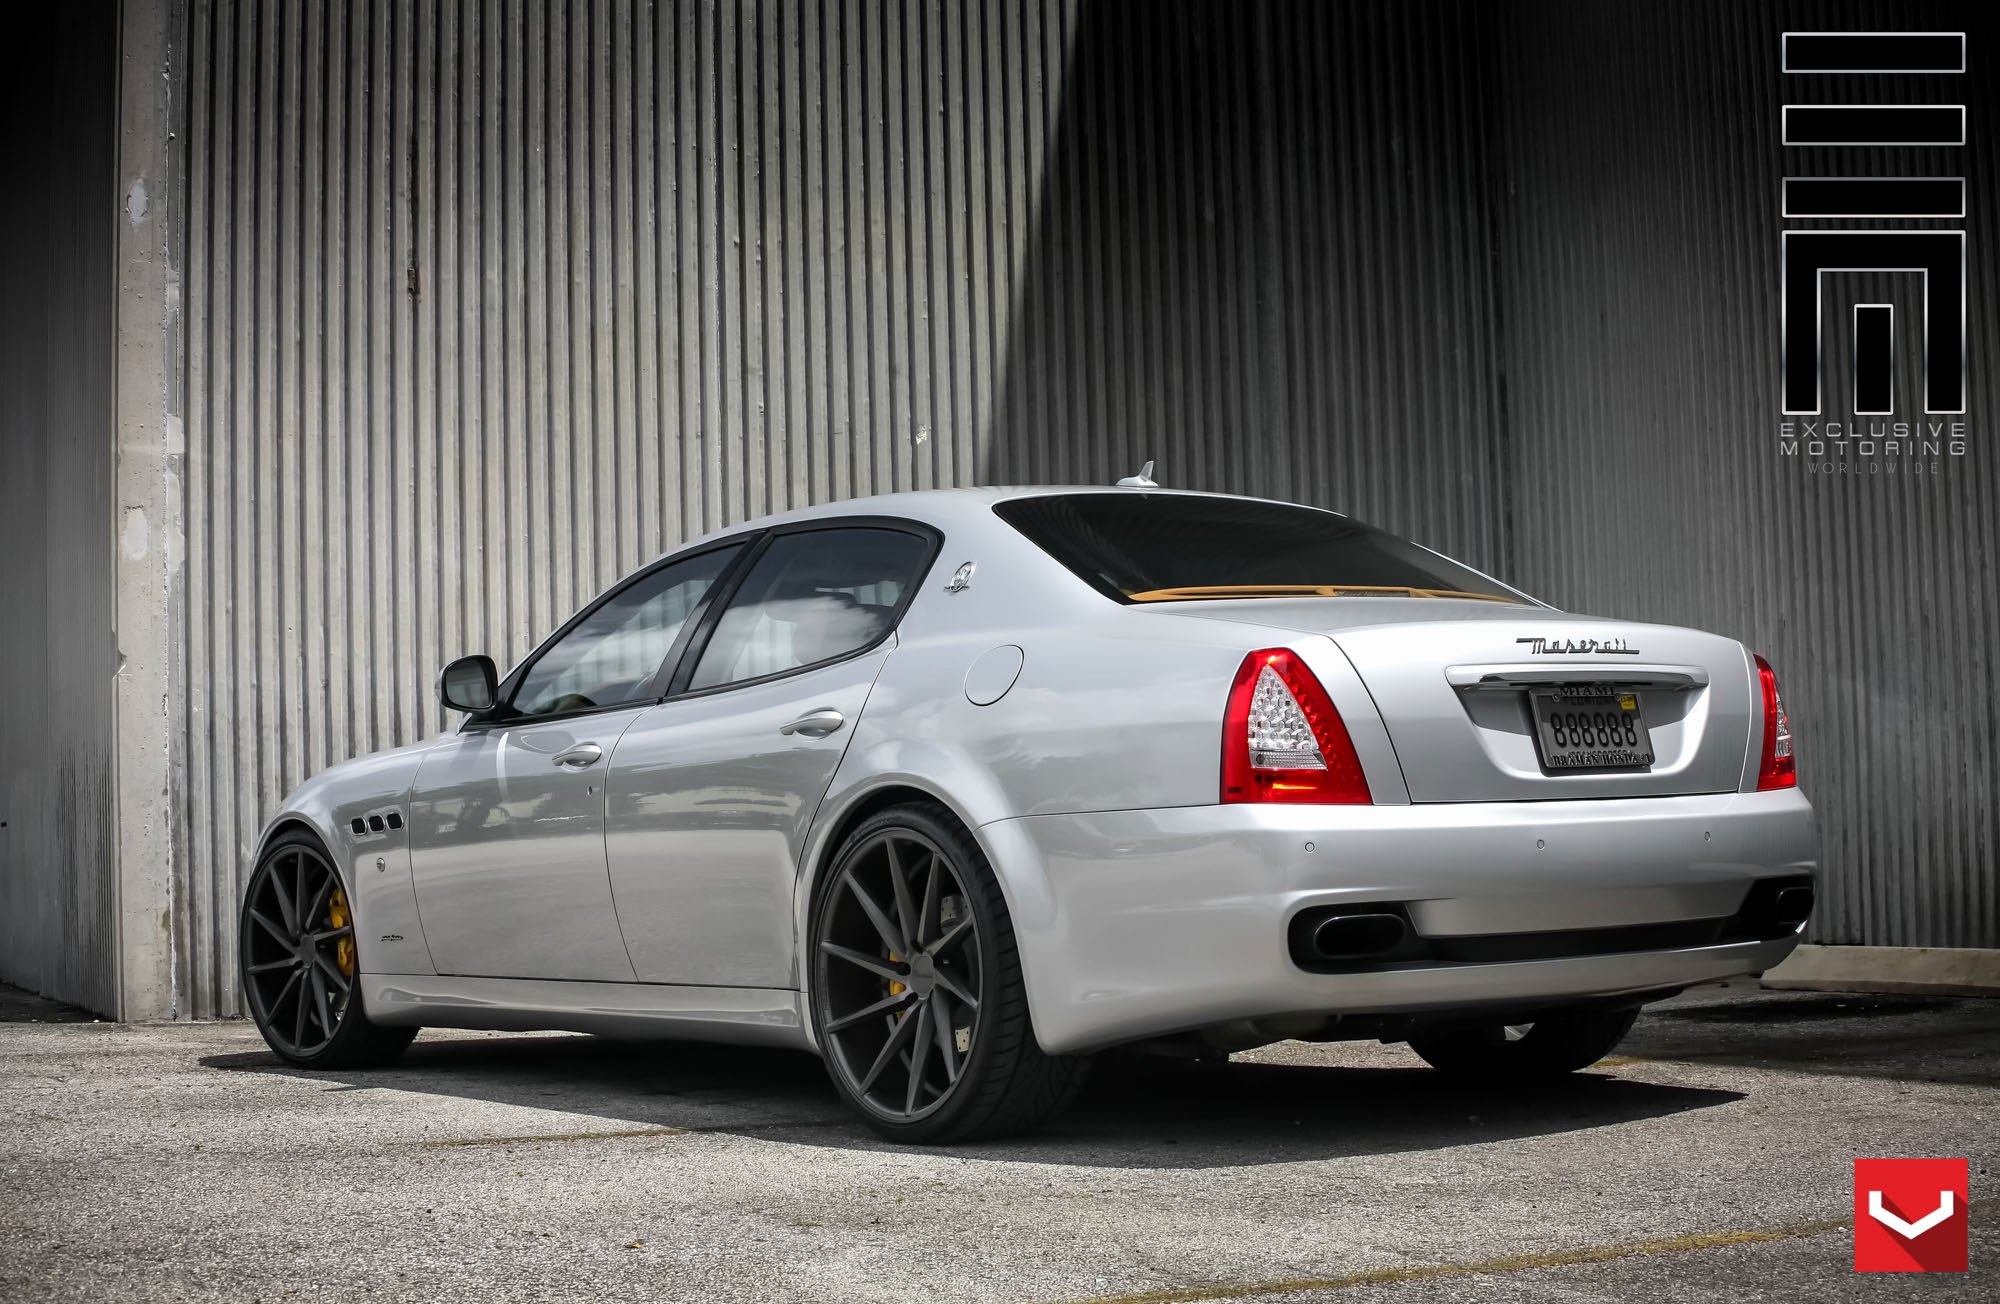 Aftermarket LED Taillights on Silver Maserati Quattroporte - Photo by Vossen